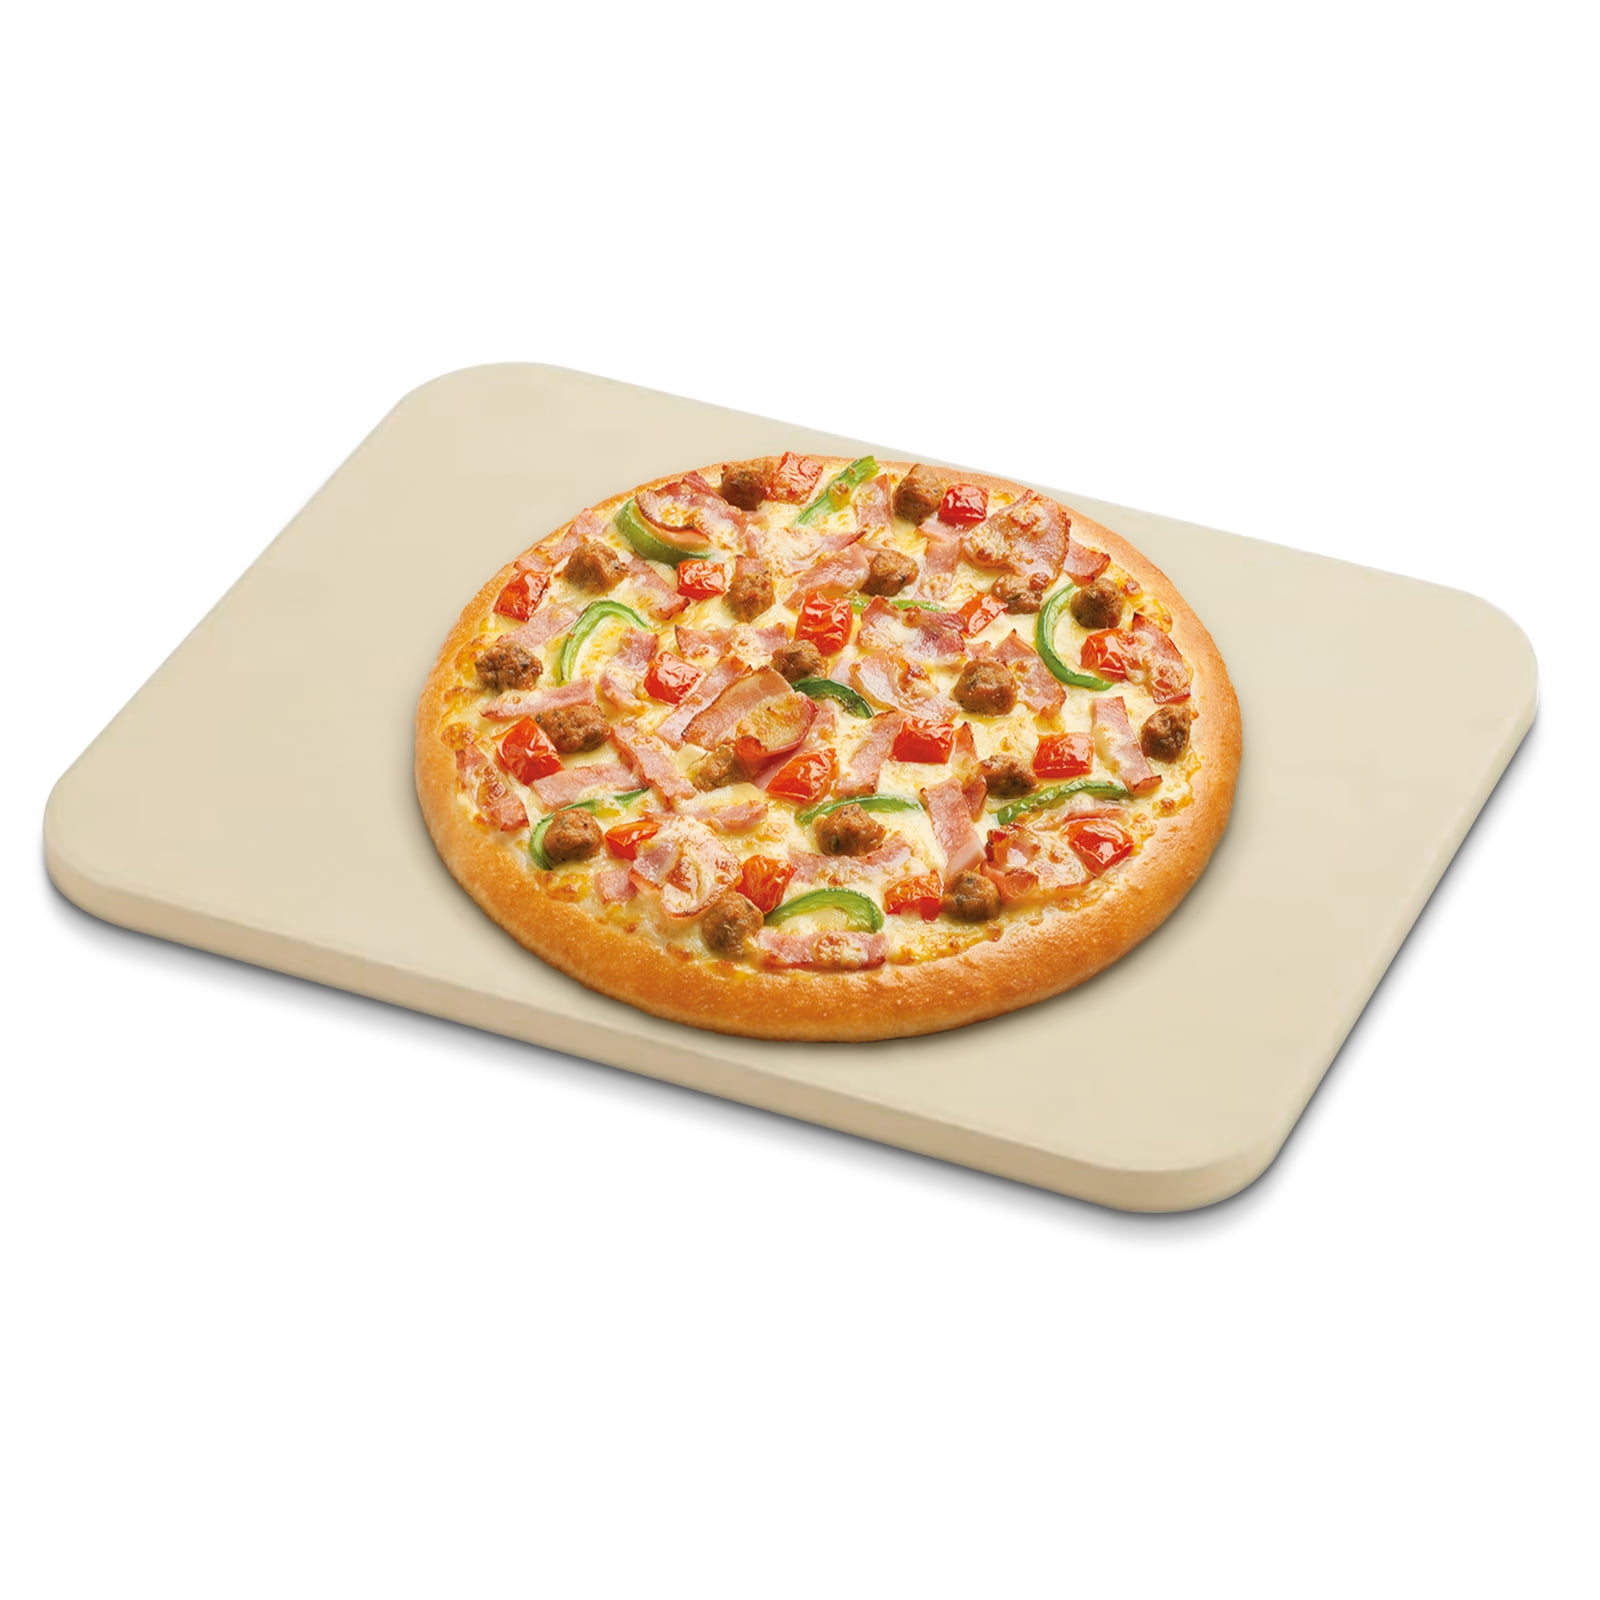 Unicook Heavy Duty Cordierite Large Pizza Stone for Oven and Grill,  Non-stick Rectangular Baking Stone, 16 x 14